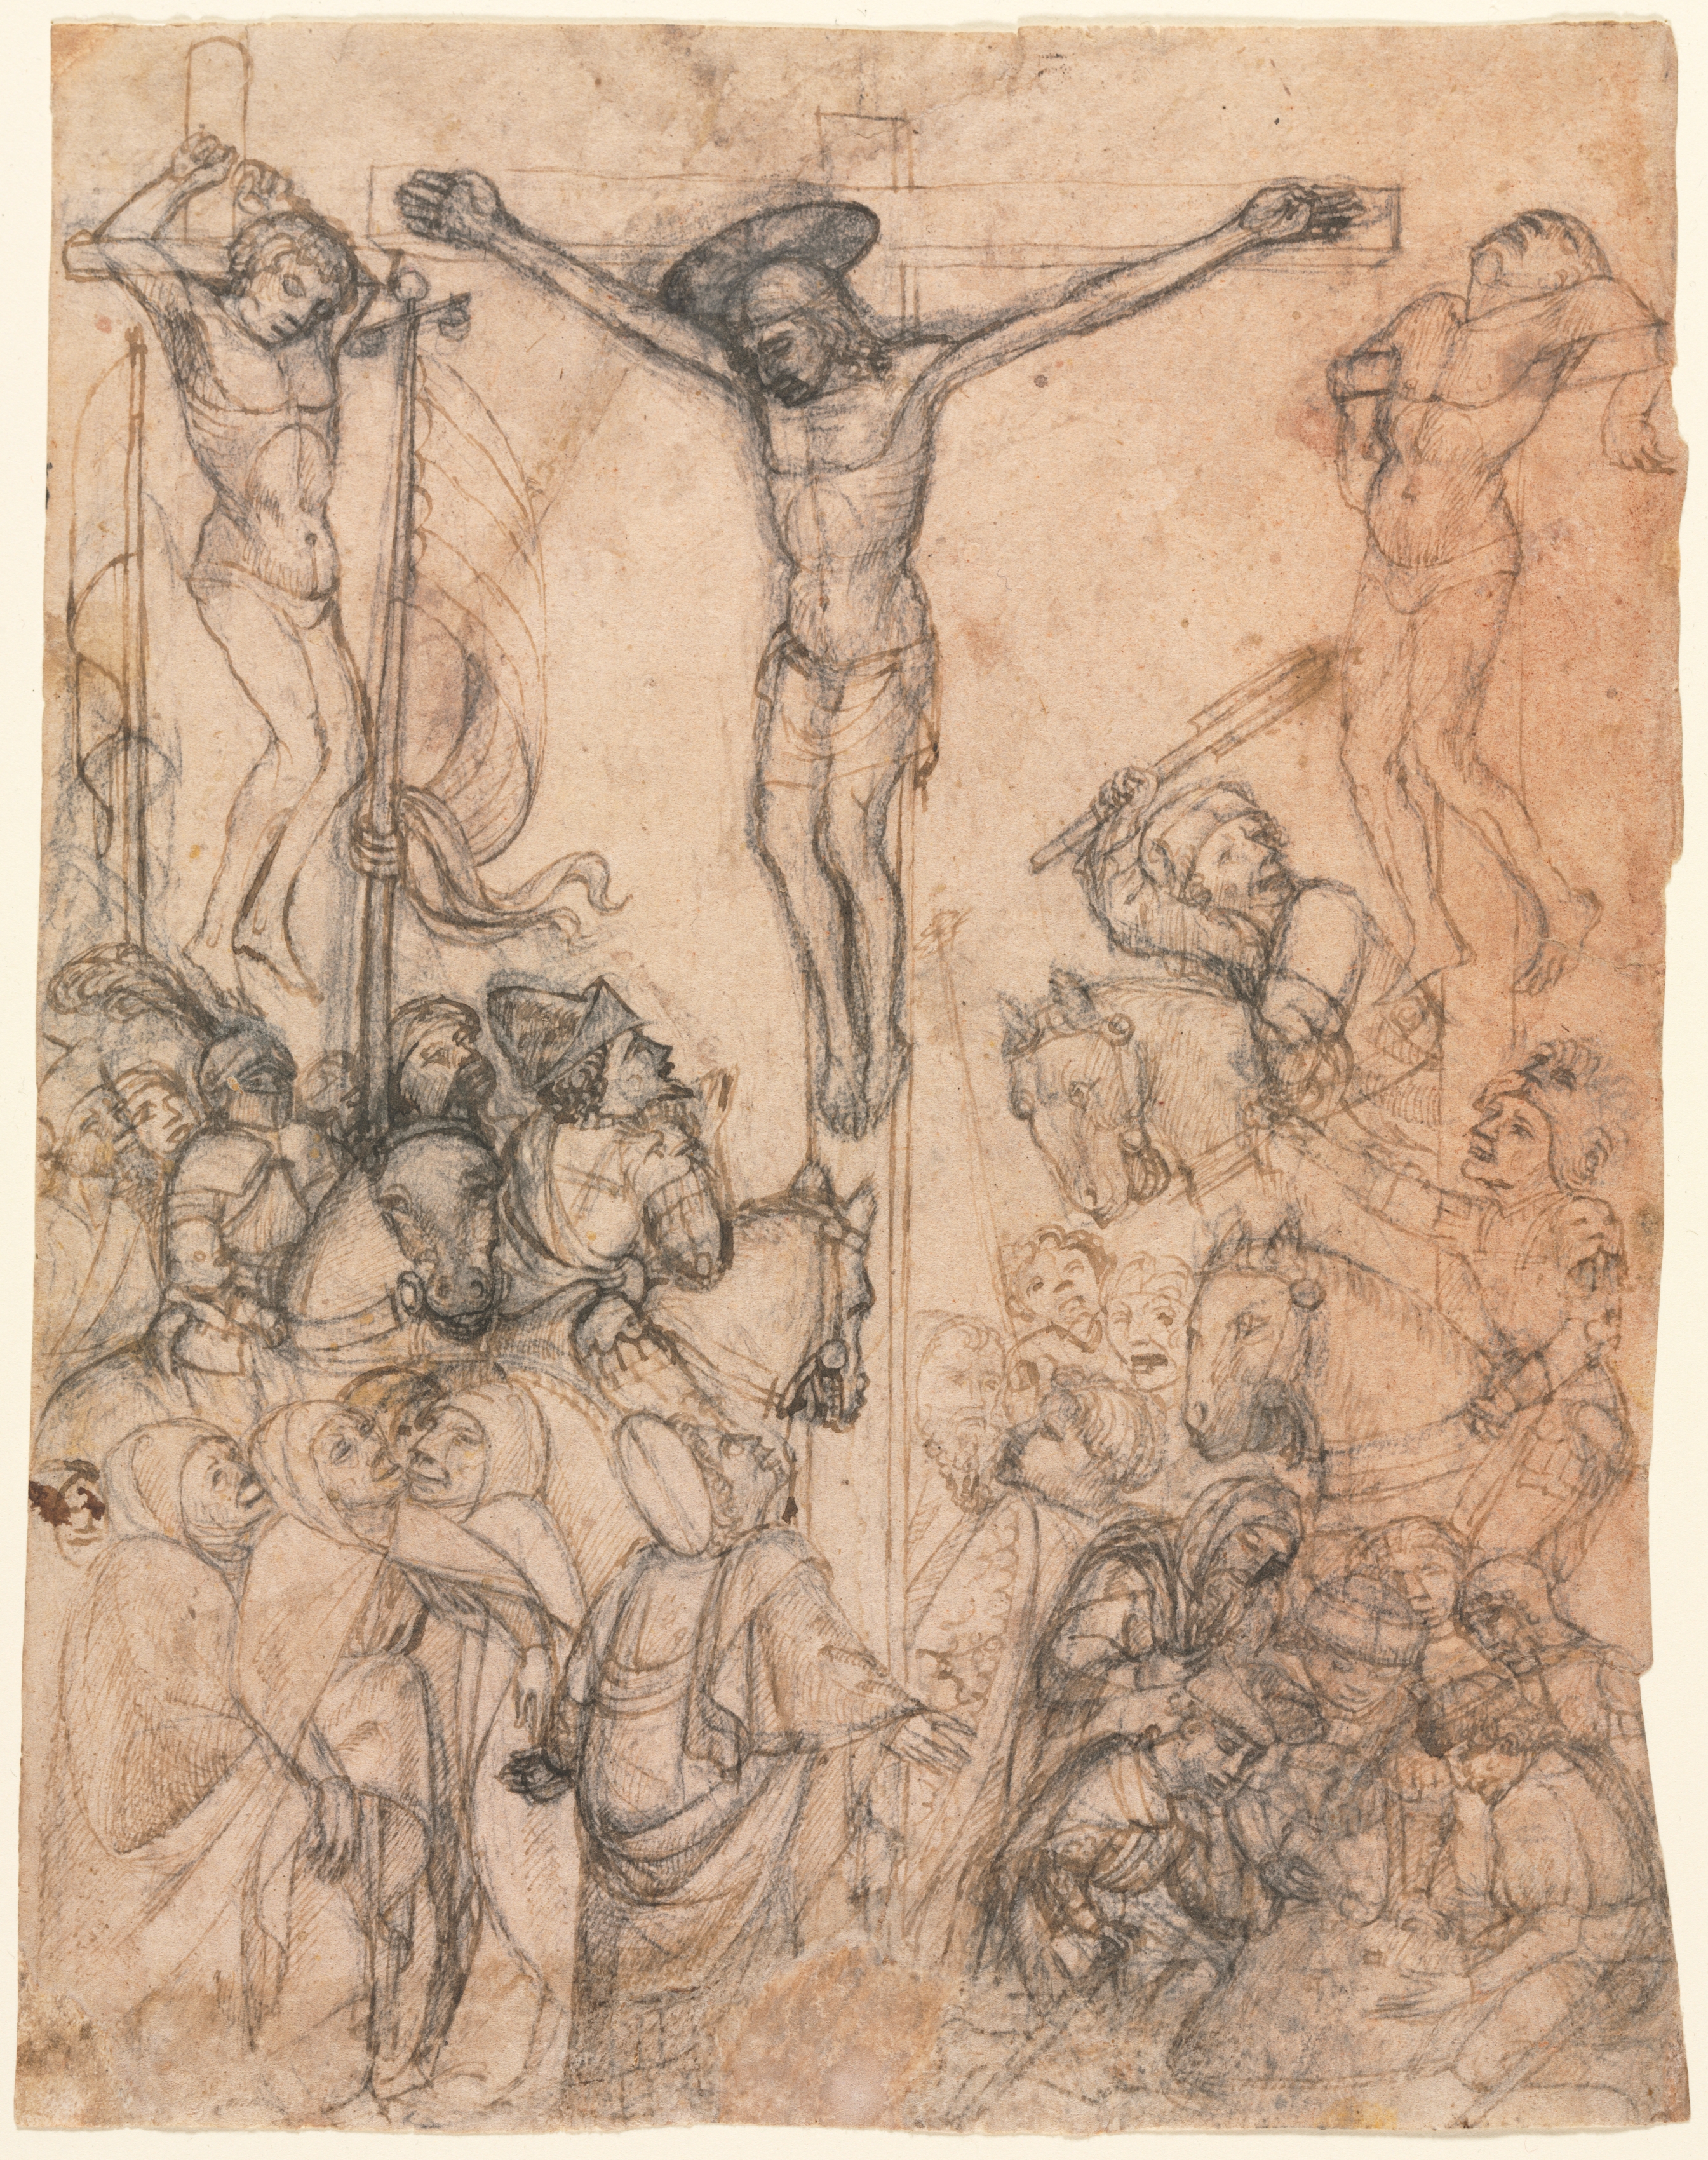 Crucifixion with the Two Thieves